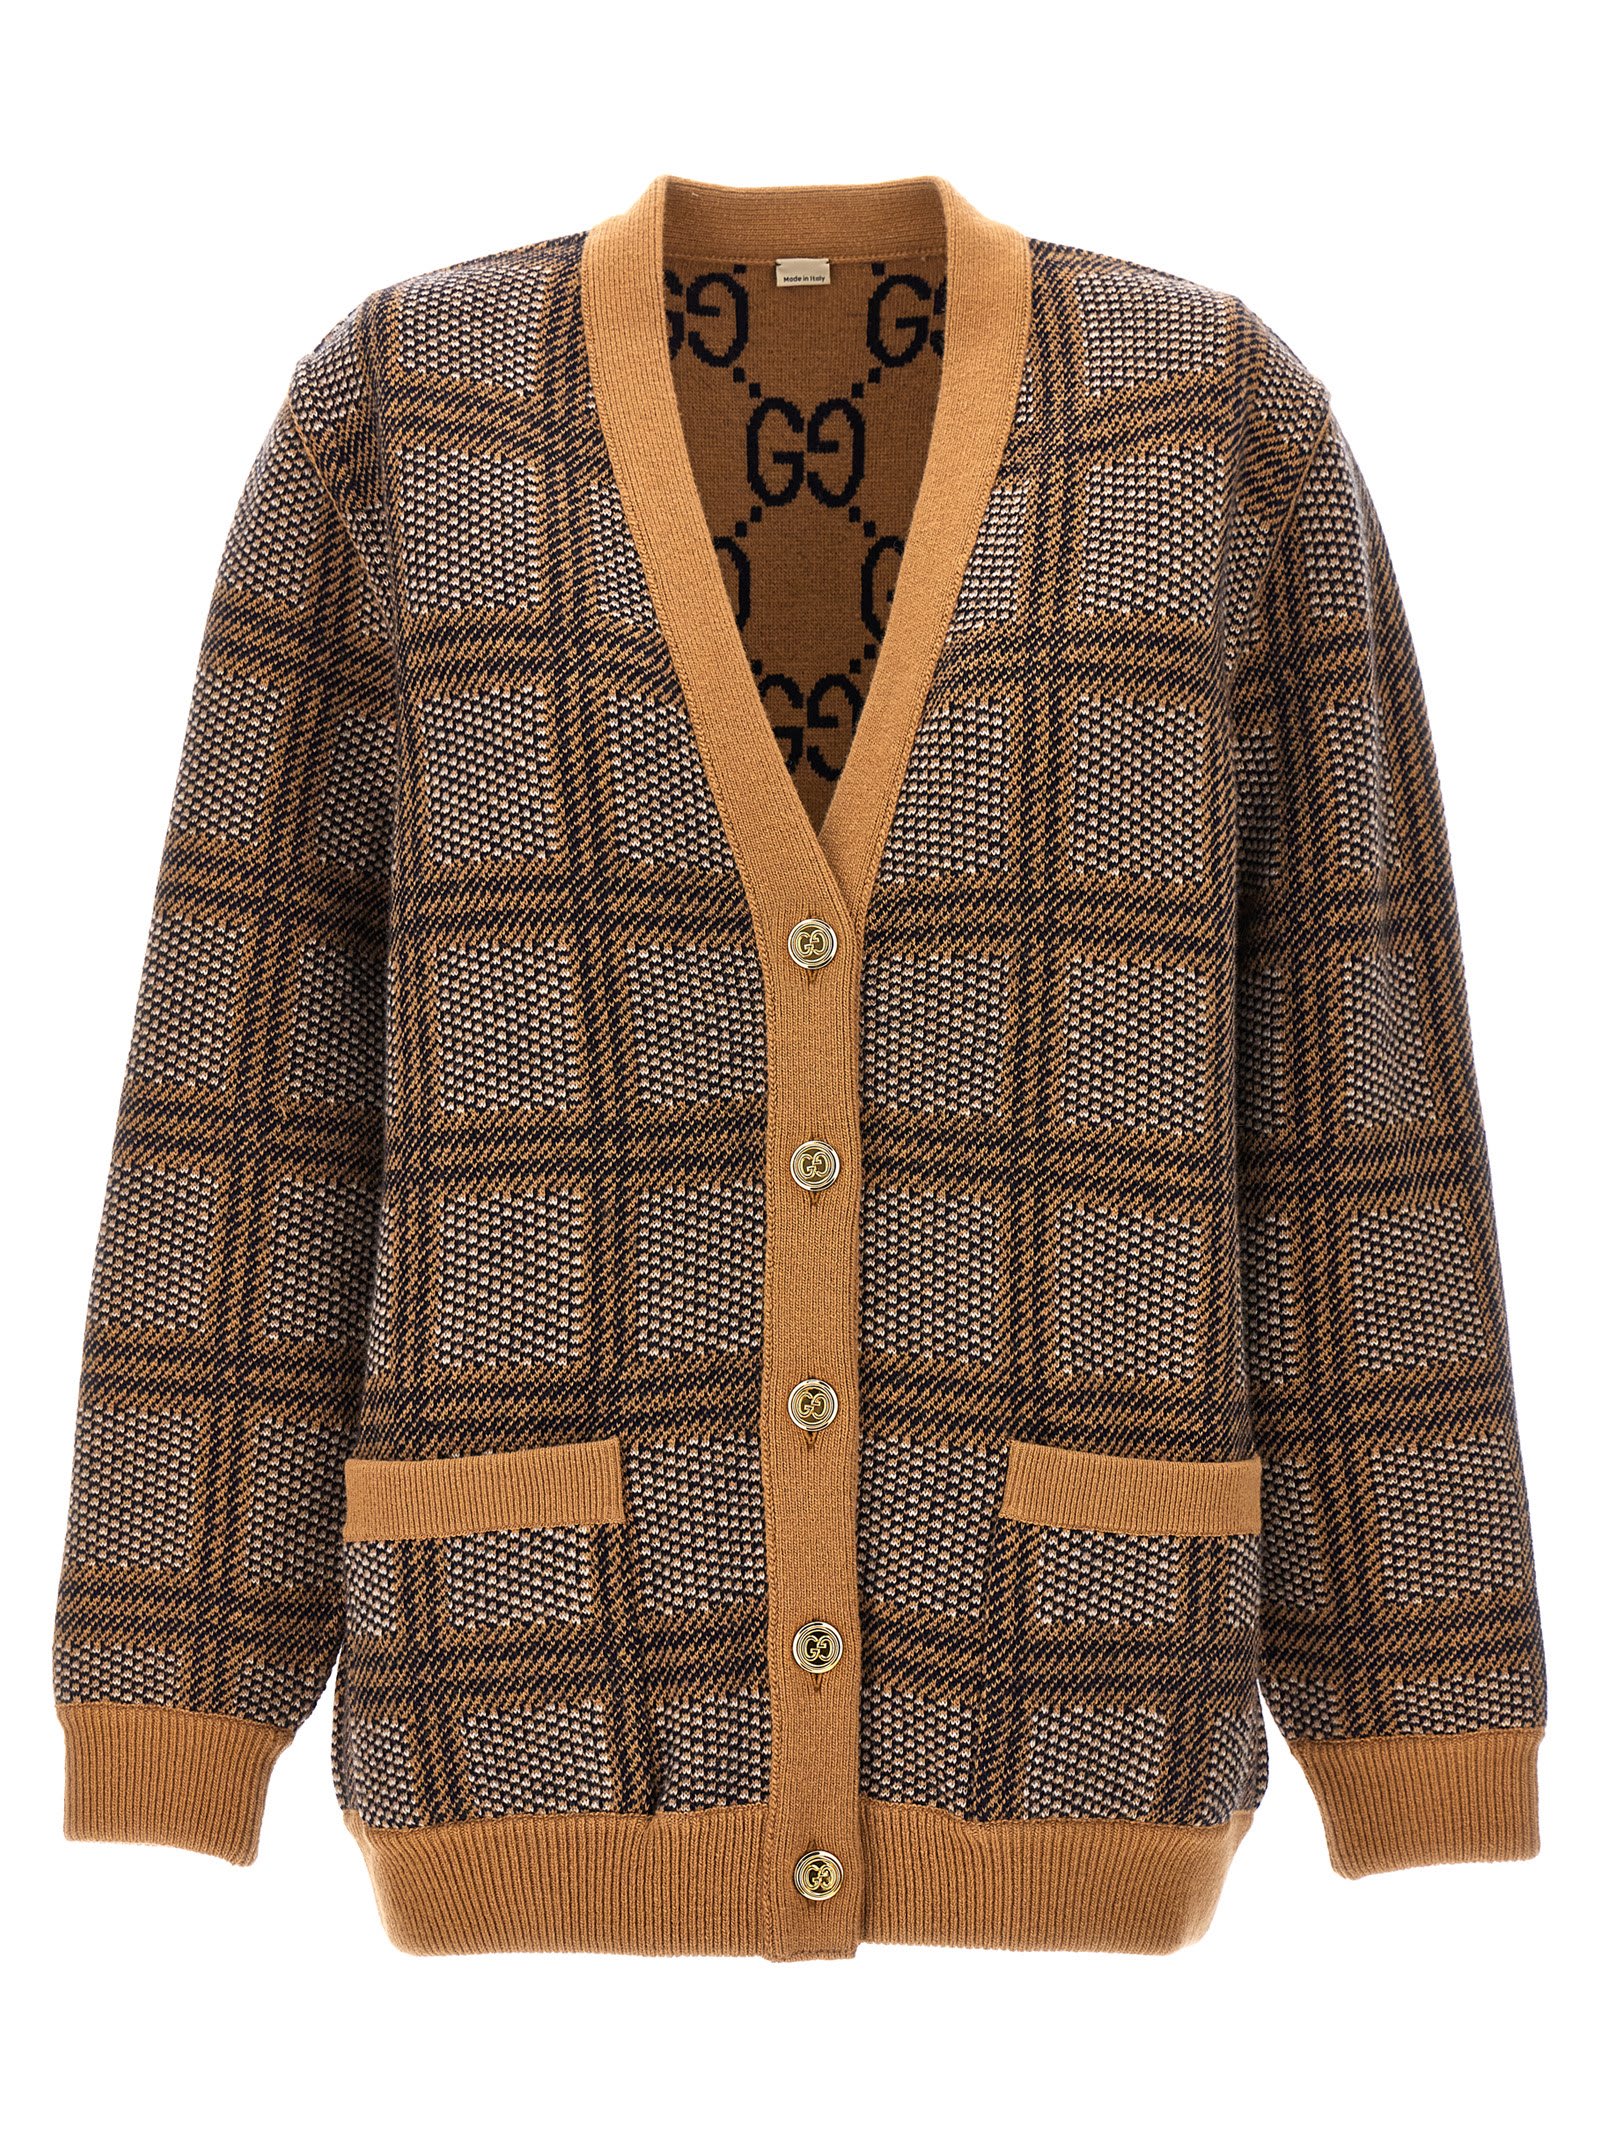 Gucci Check And Gg Reversible Cardigan In Beige